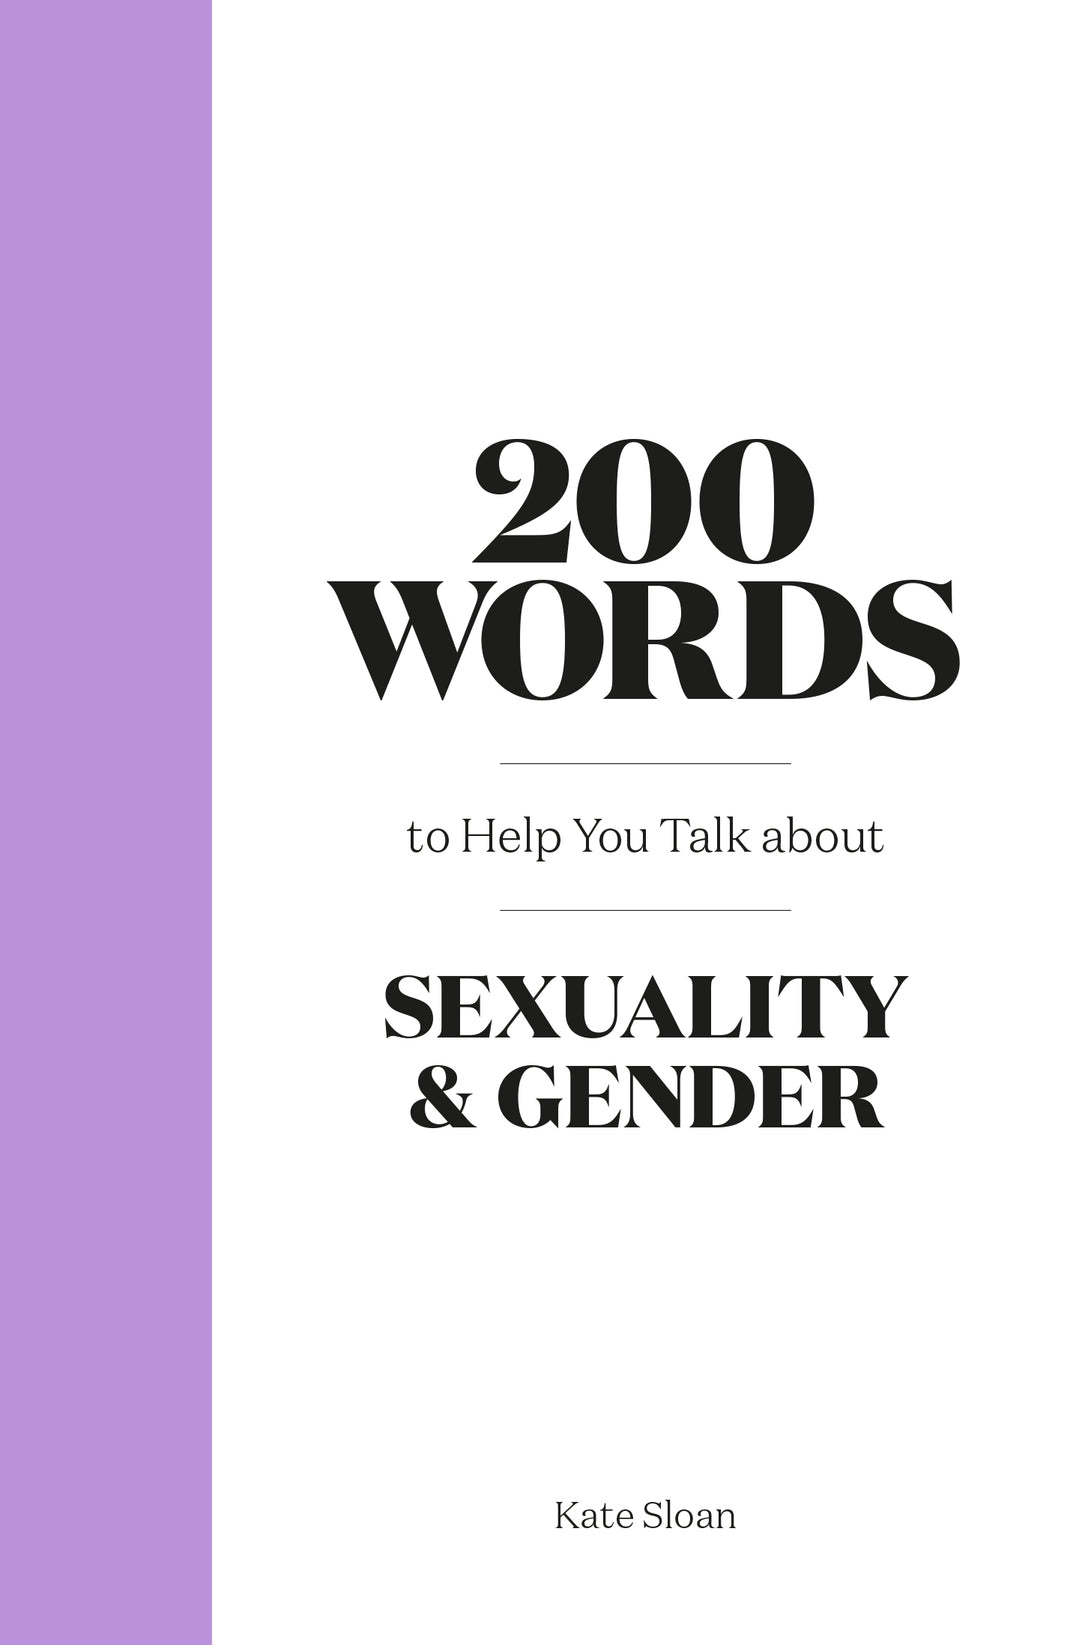 200 Words to Help you Talk about Sexuality & Gender by Kate Sloan